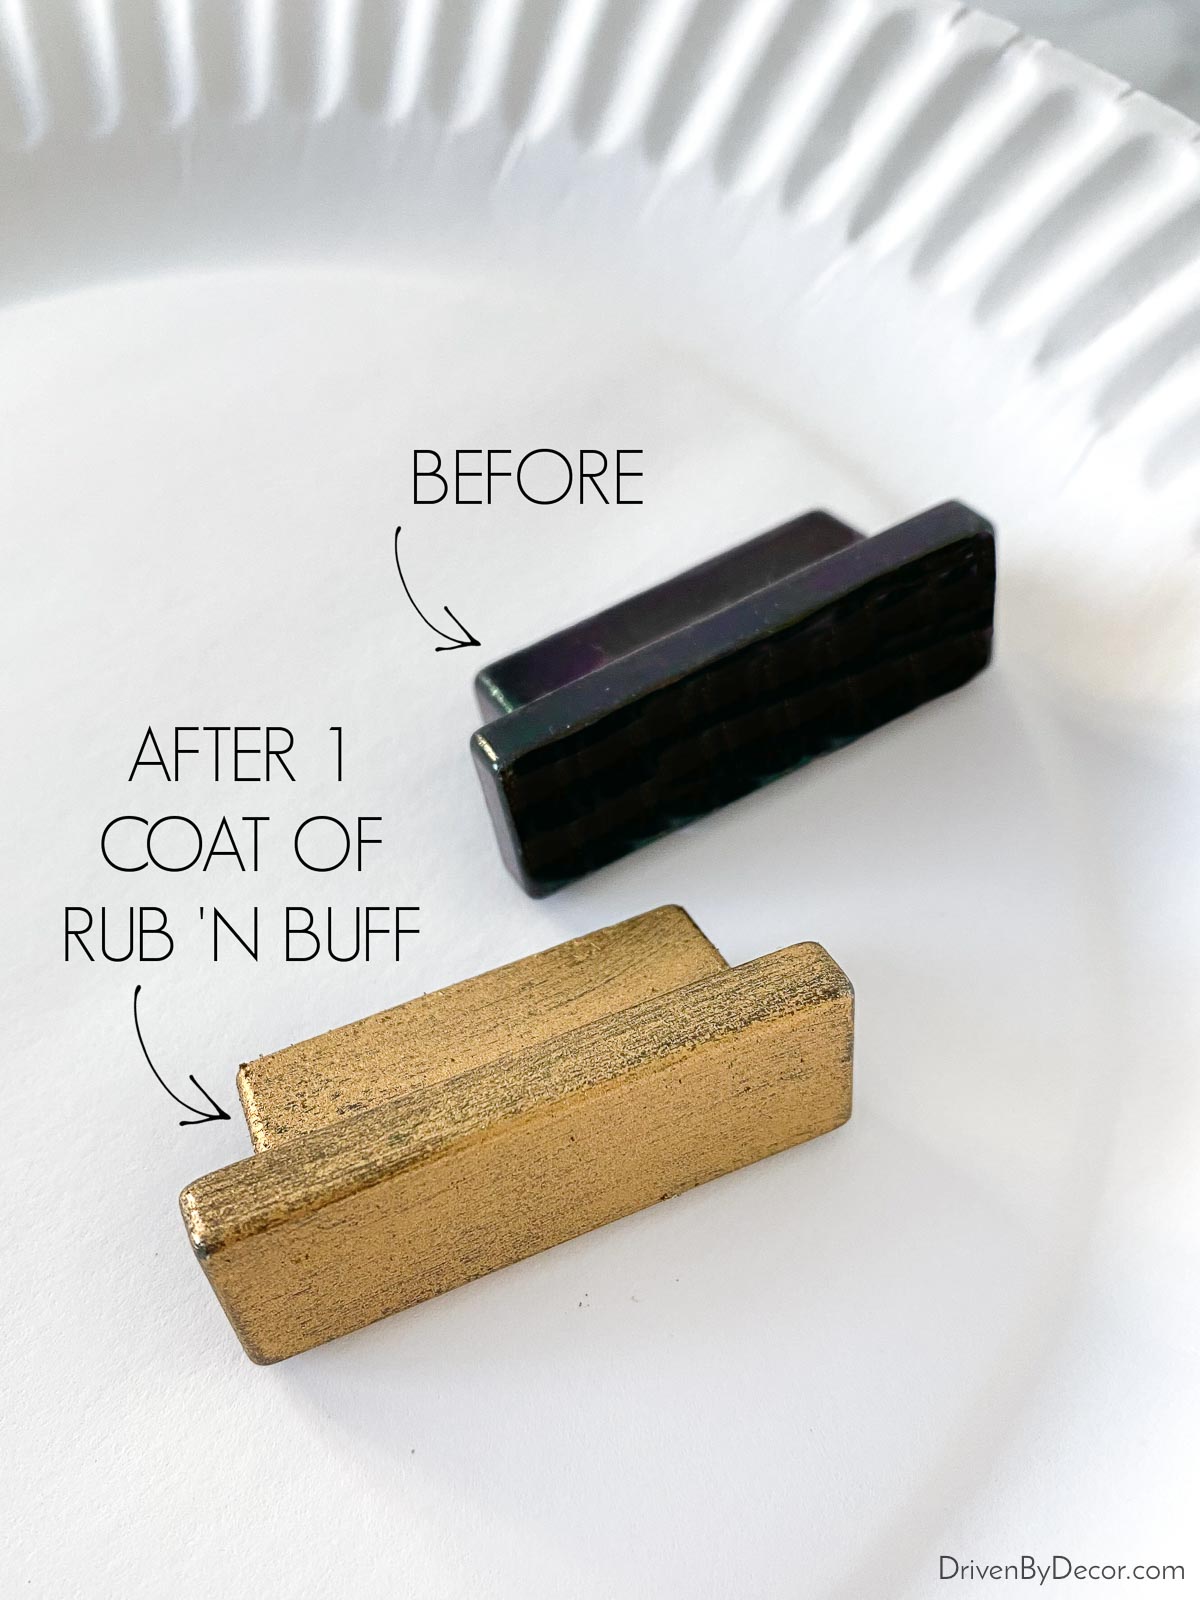 Rub 'n Buff used to change knobs to gold color